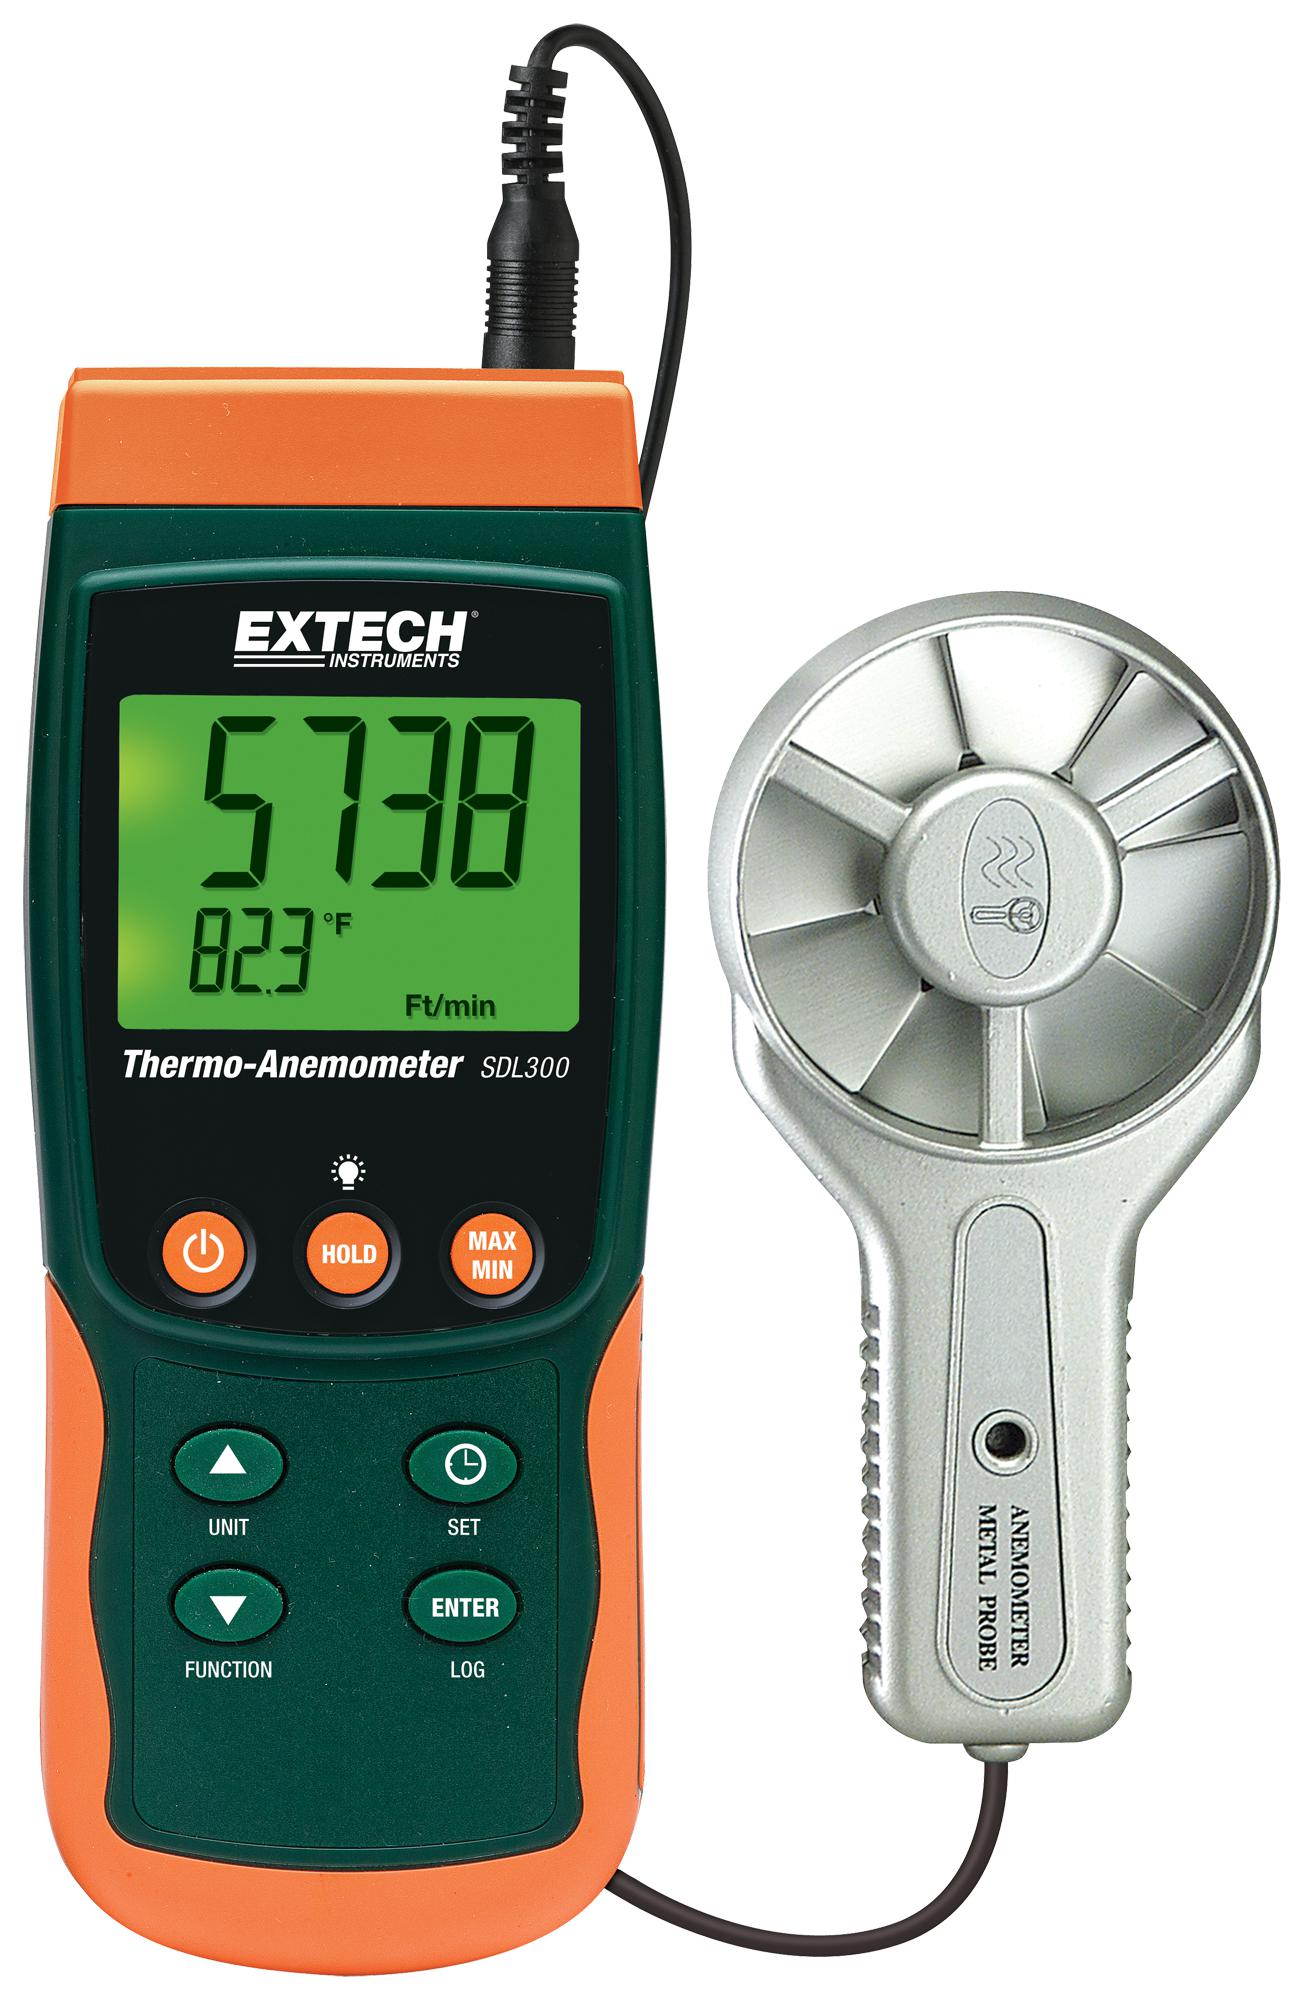 SDL300 THERMO-ANEMOMETER/DATALOGGER, 0.4-35M/S EXTECH INSTRUMENTS